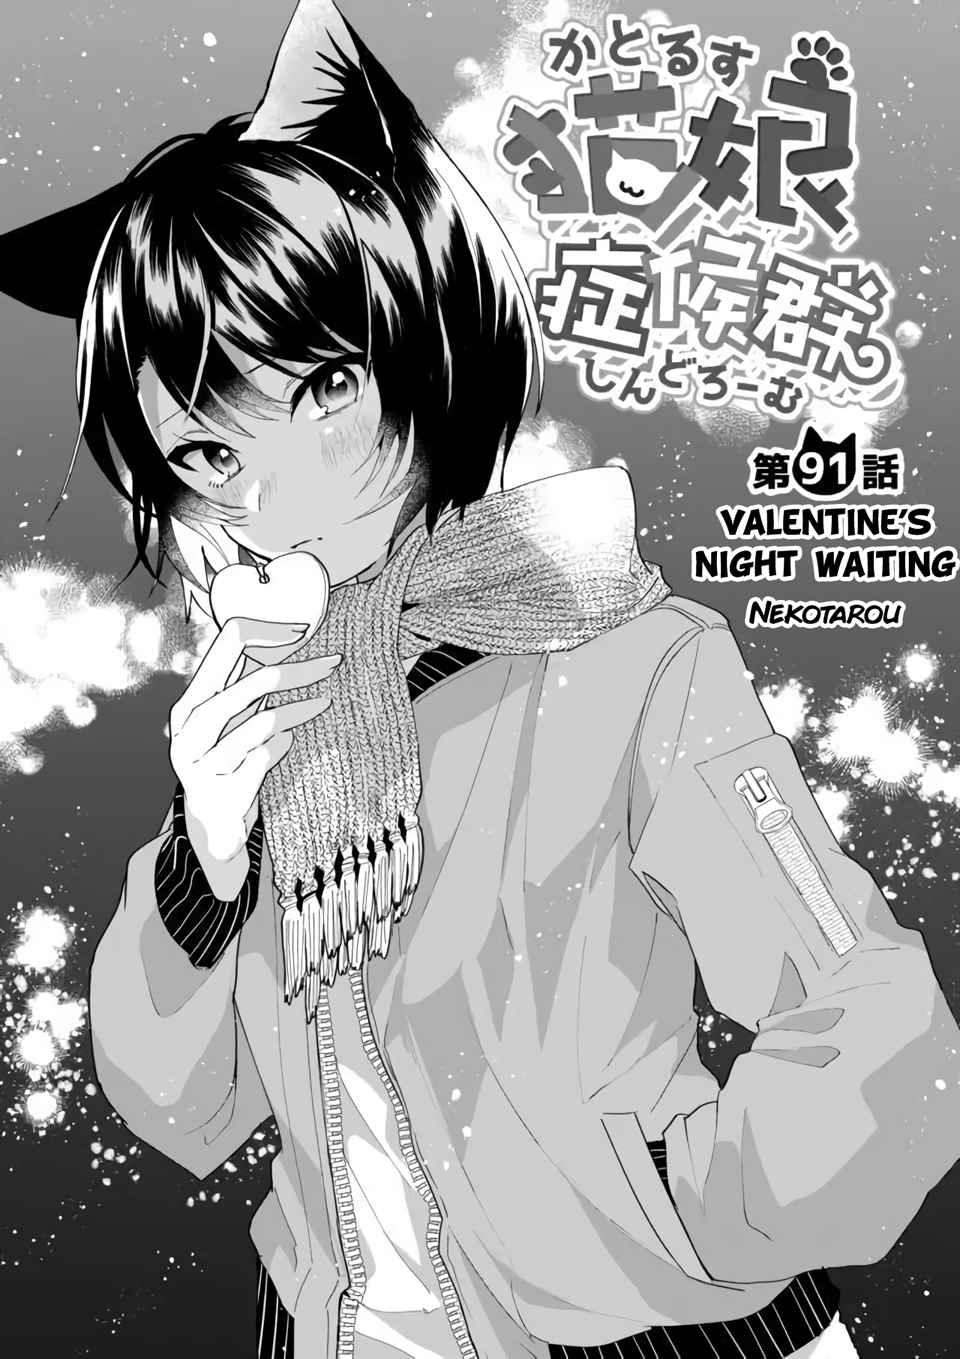 Catulus Syndrome Ch. 91 Valentine's Night Waiting